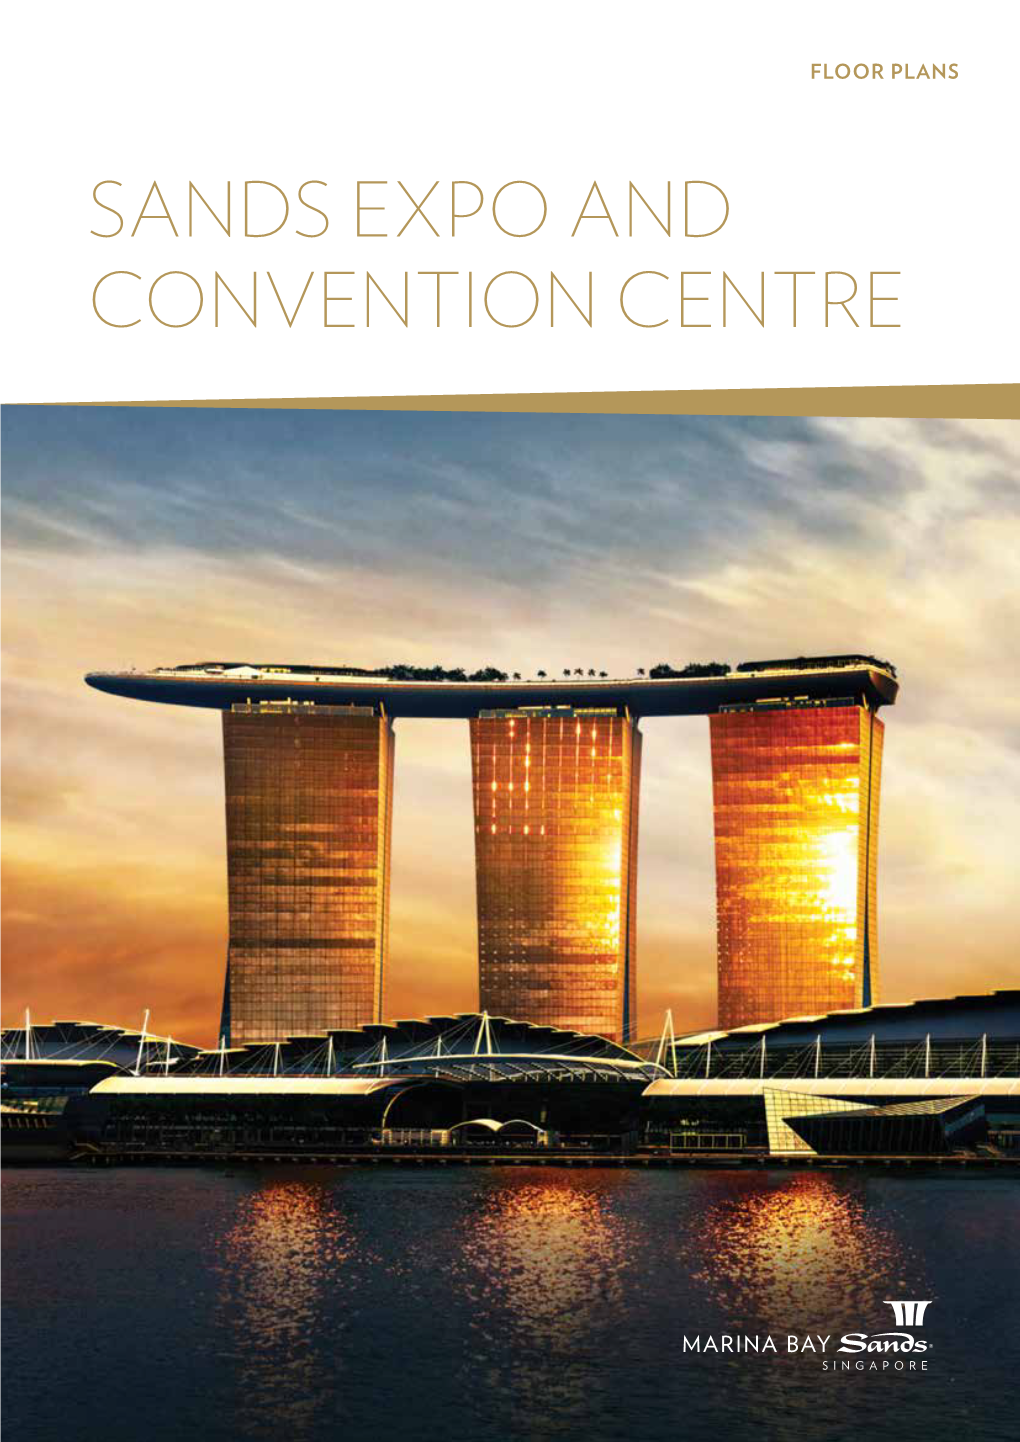 Sands Expo and Convention Centre Legend